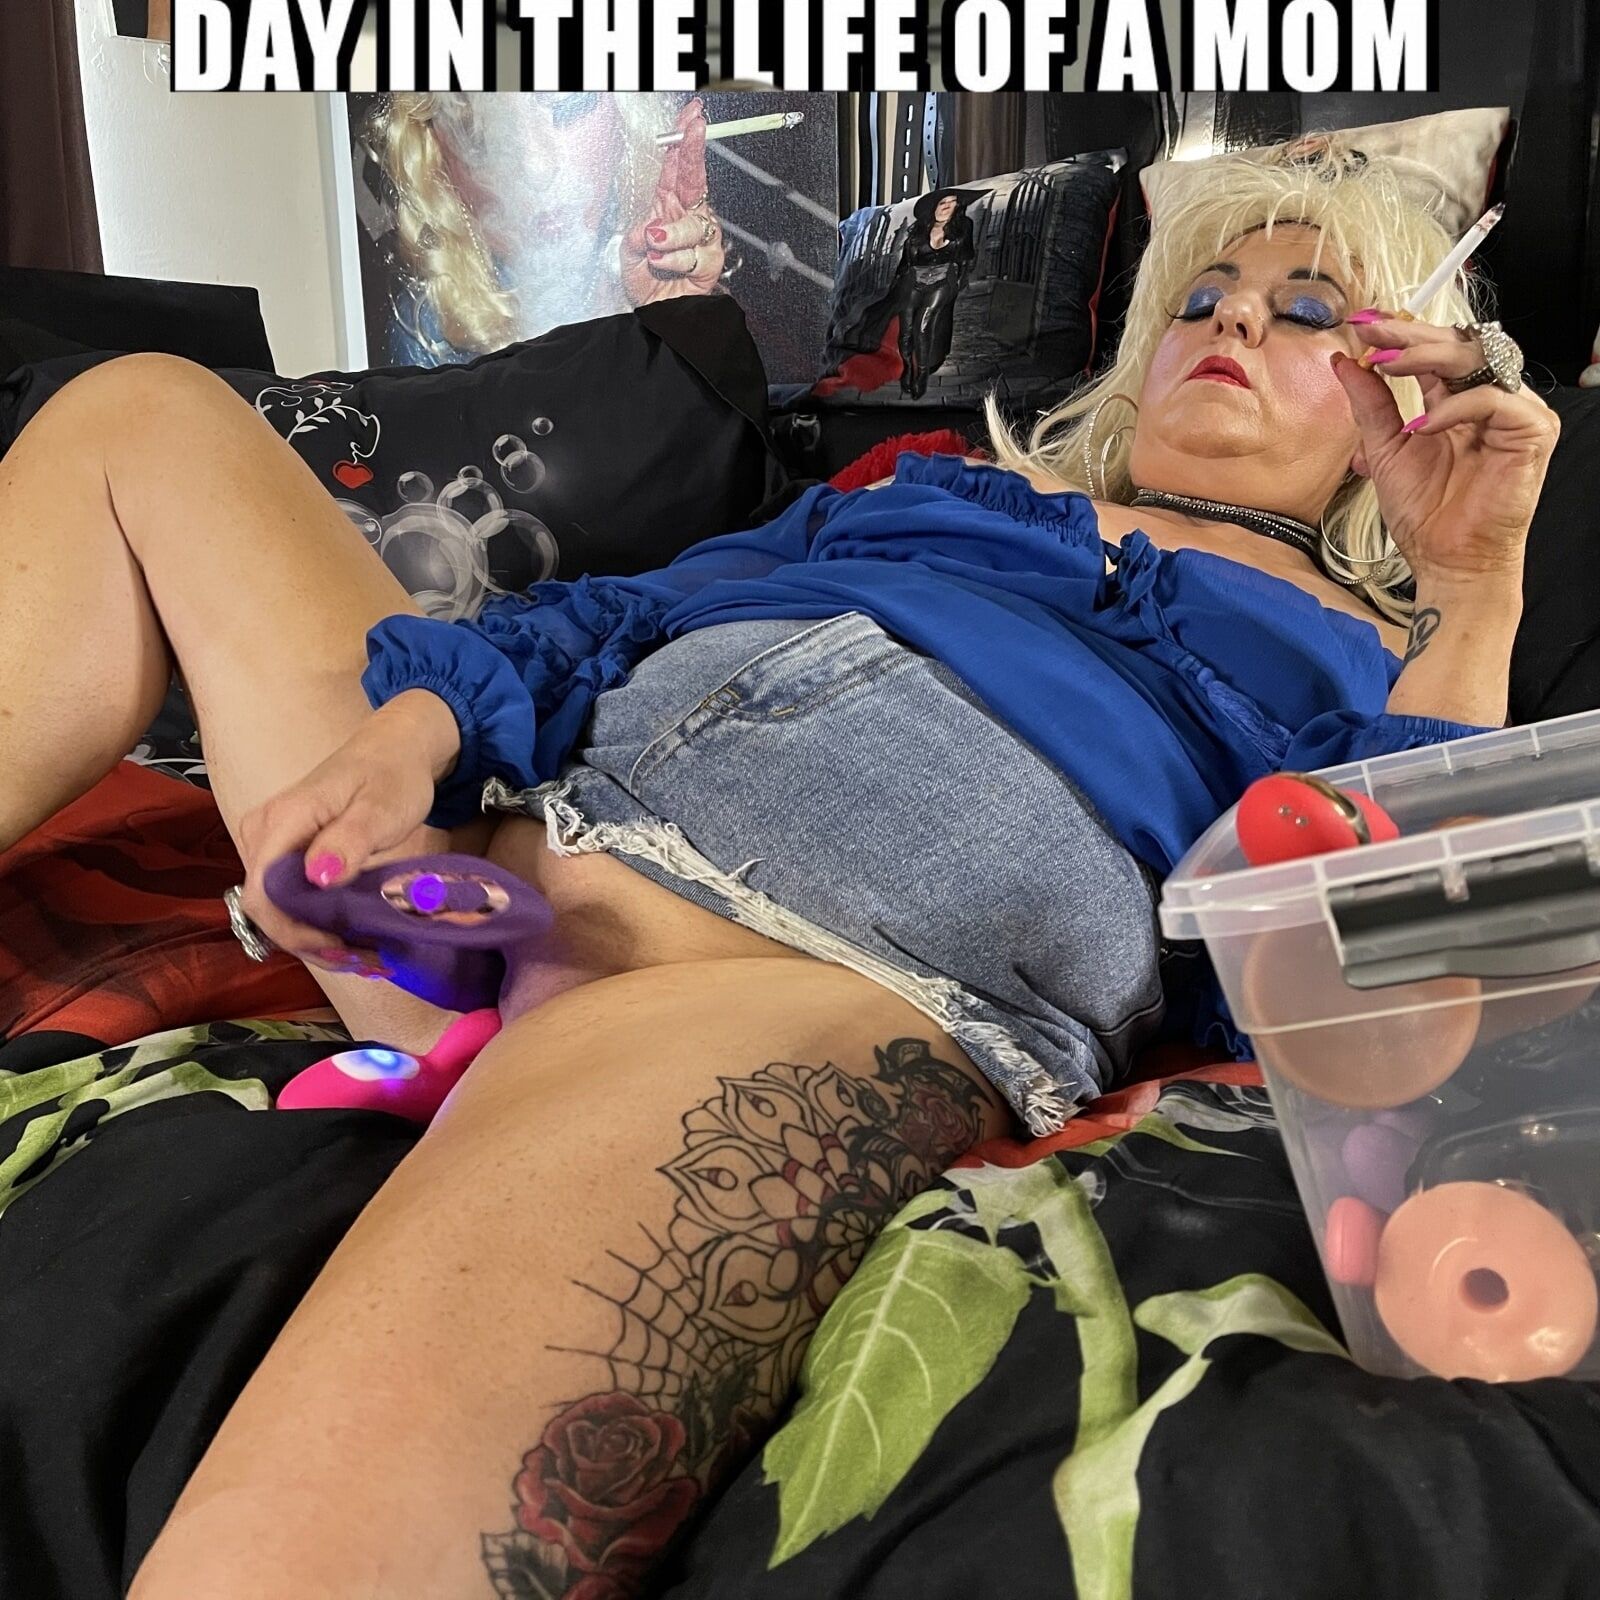 SHIRLEY THE LIFE OF A MOM #14